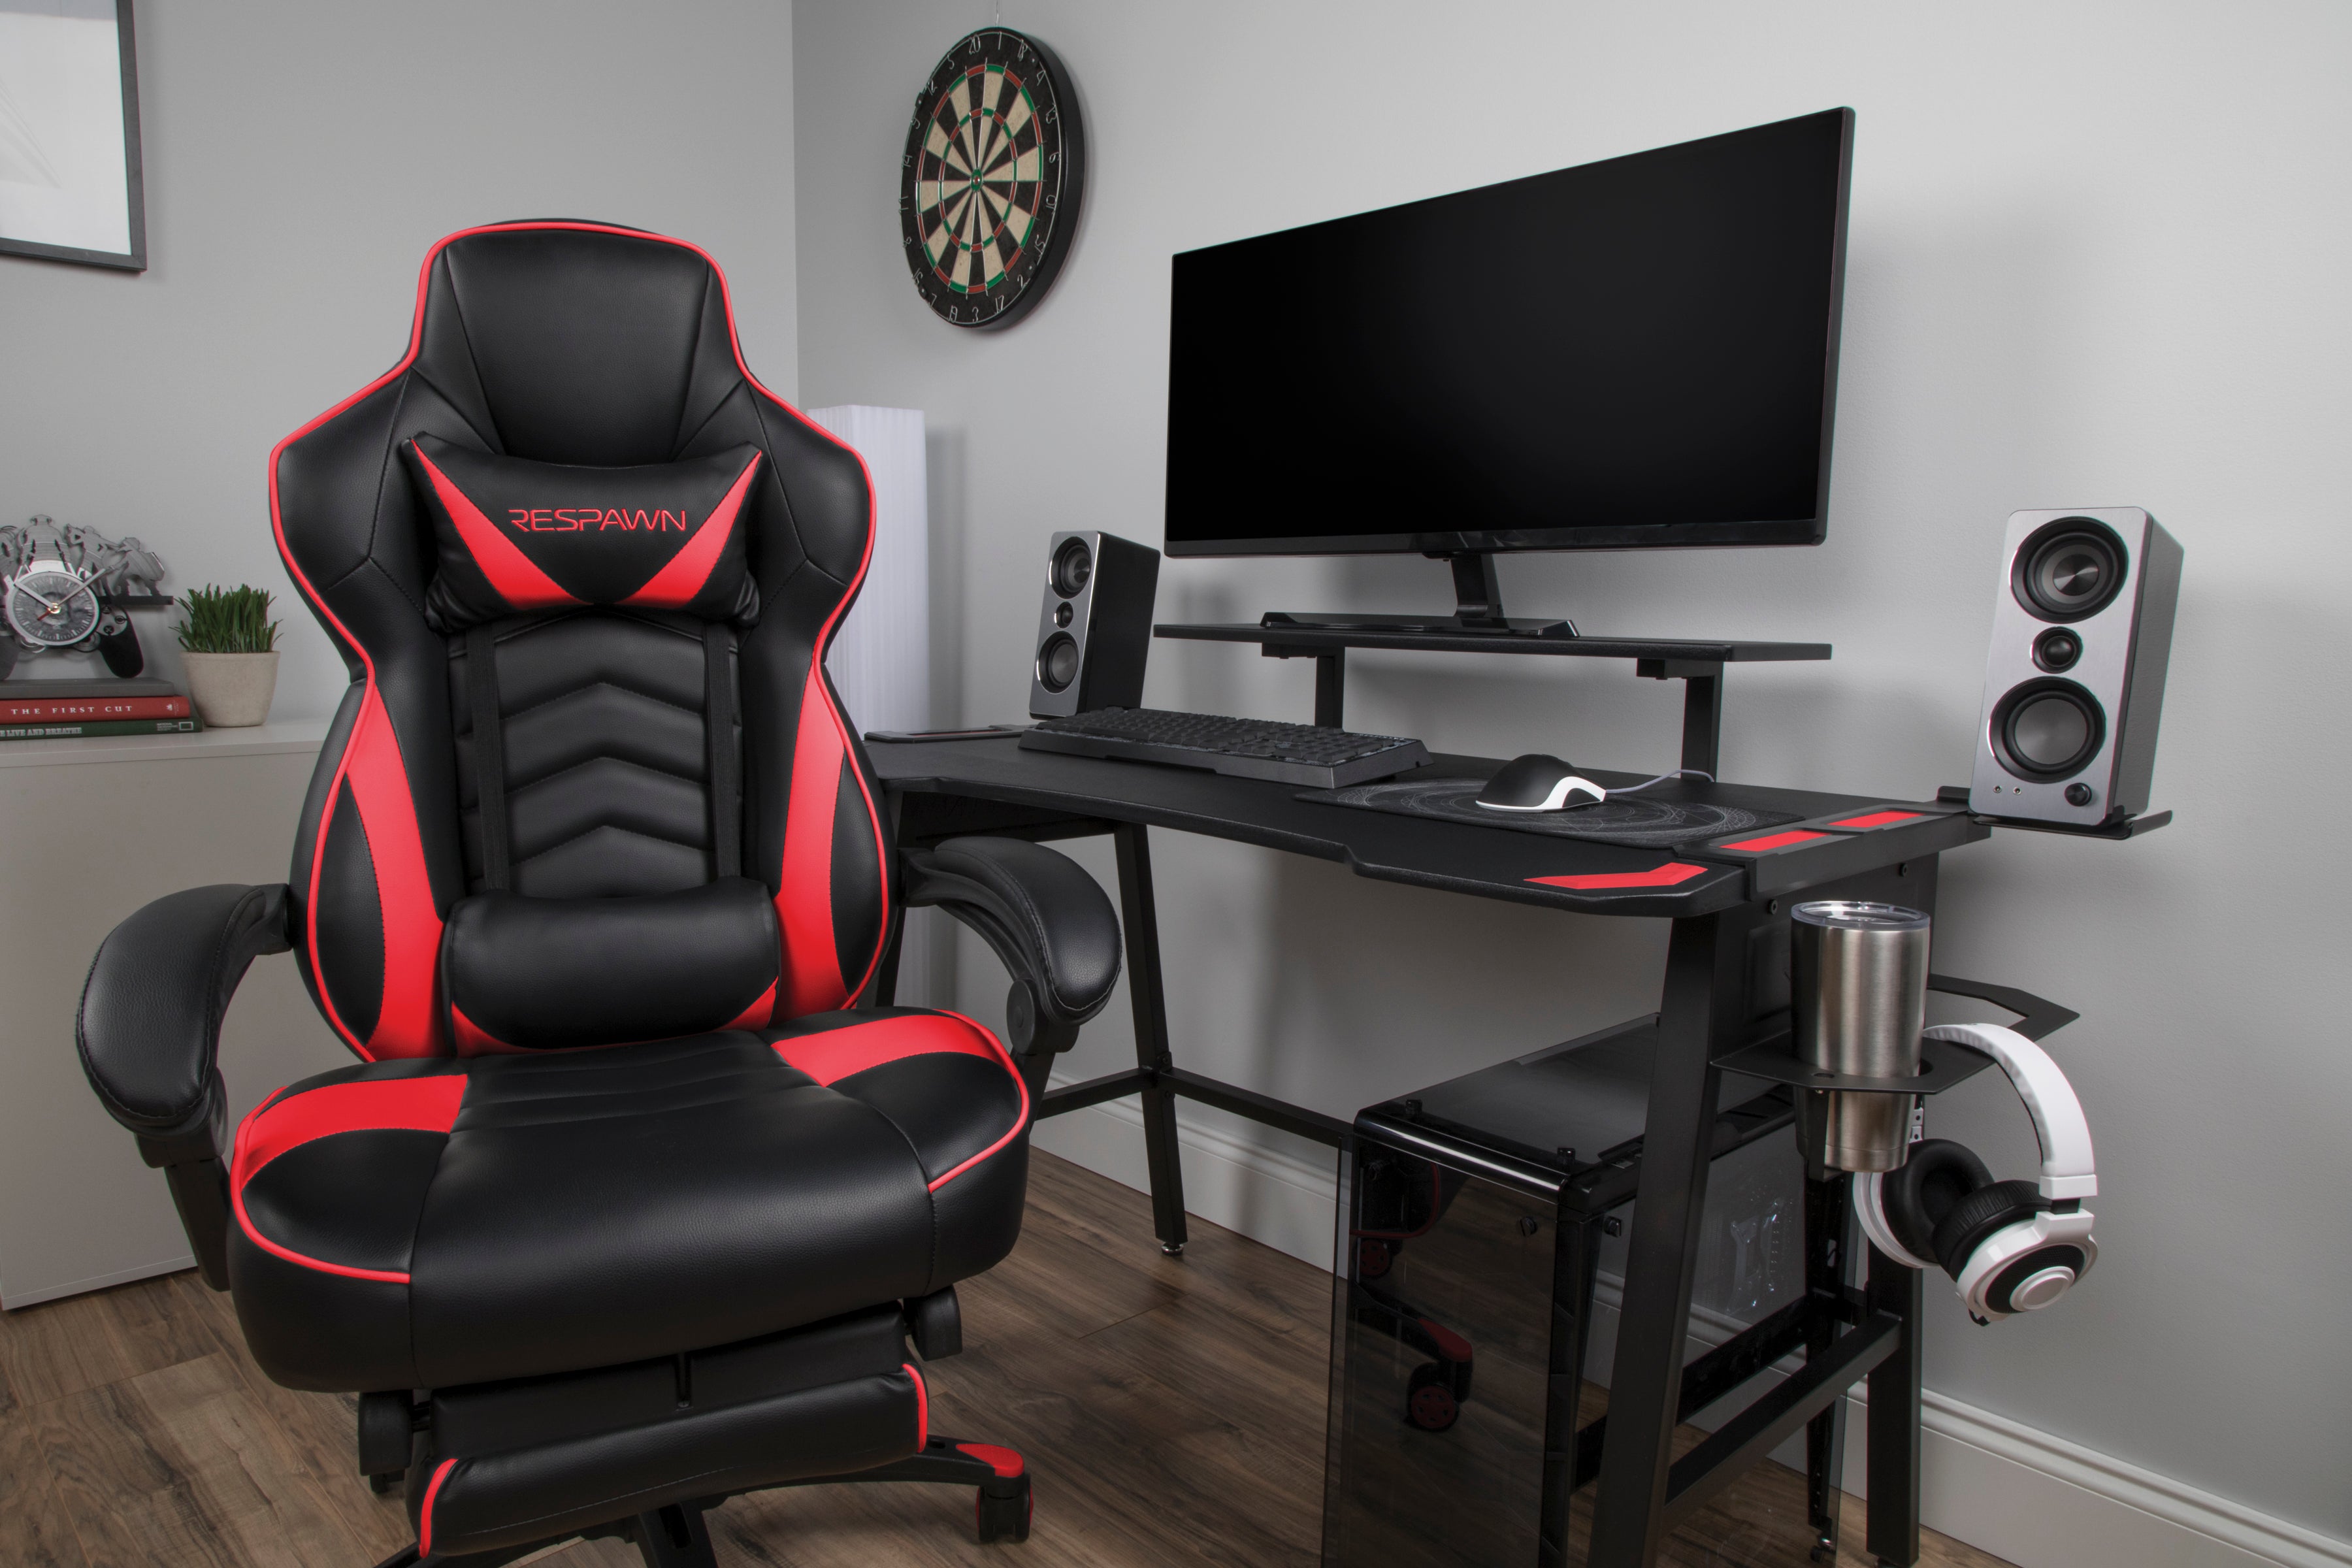 Benefits of gaming chairs